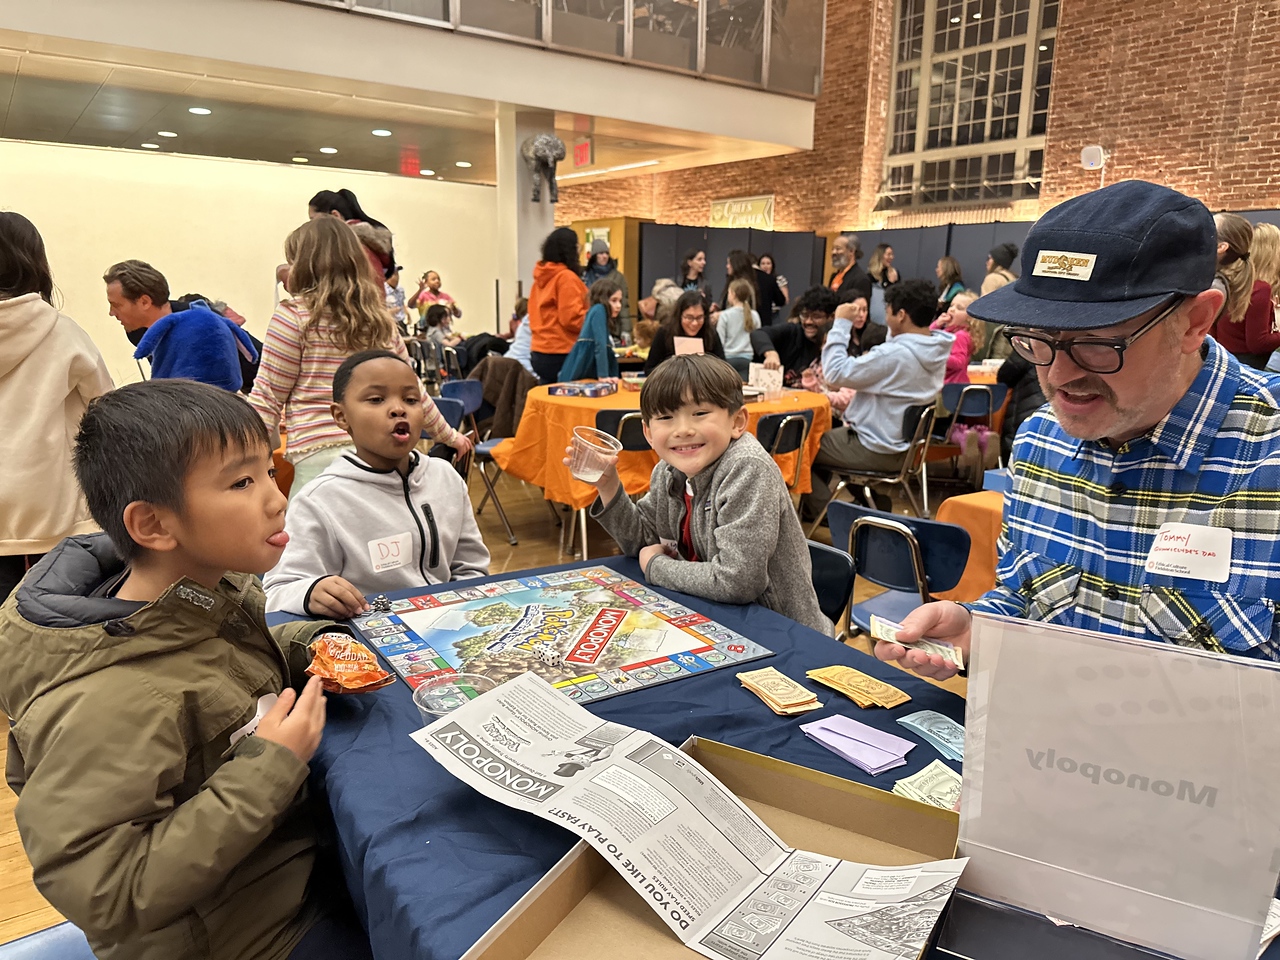 Fieldston Lower students and families enjoy games together in Fieldston Upper dining hall at Fieldston Lower Game Night.